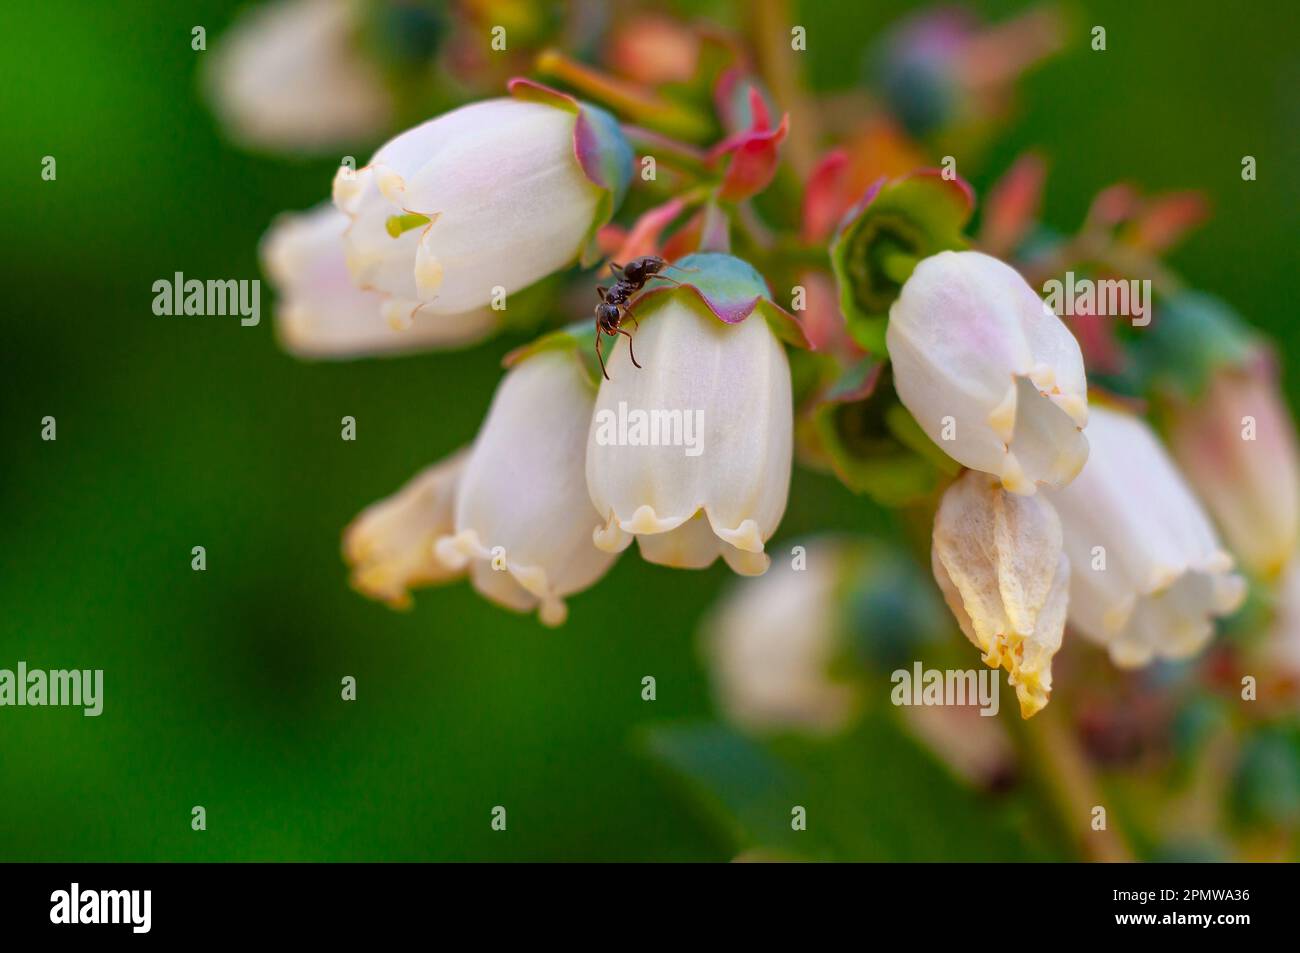 Spring blueberry flowers with an ant on a bell inflorescence. Blueberry bush in the garden closeup Stock Photo